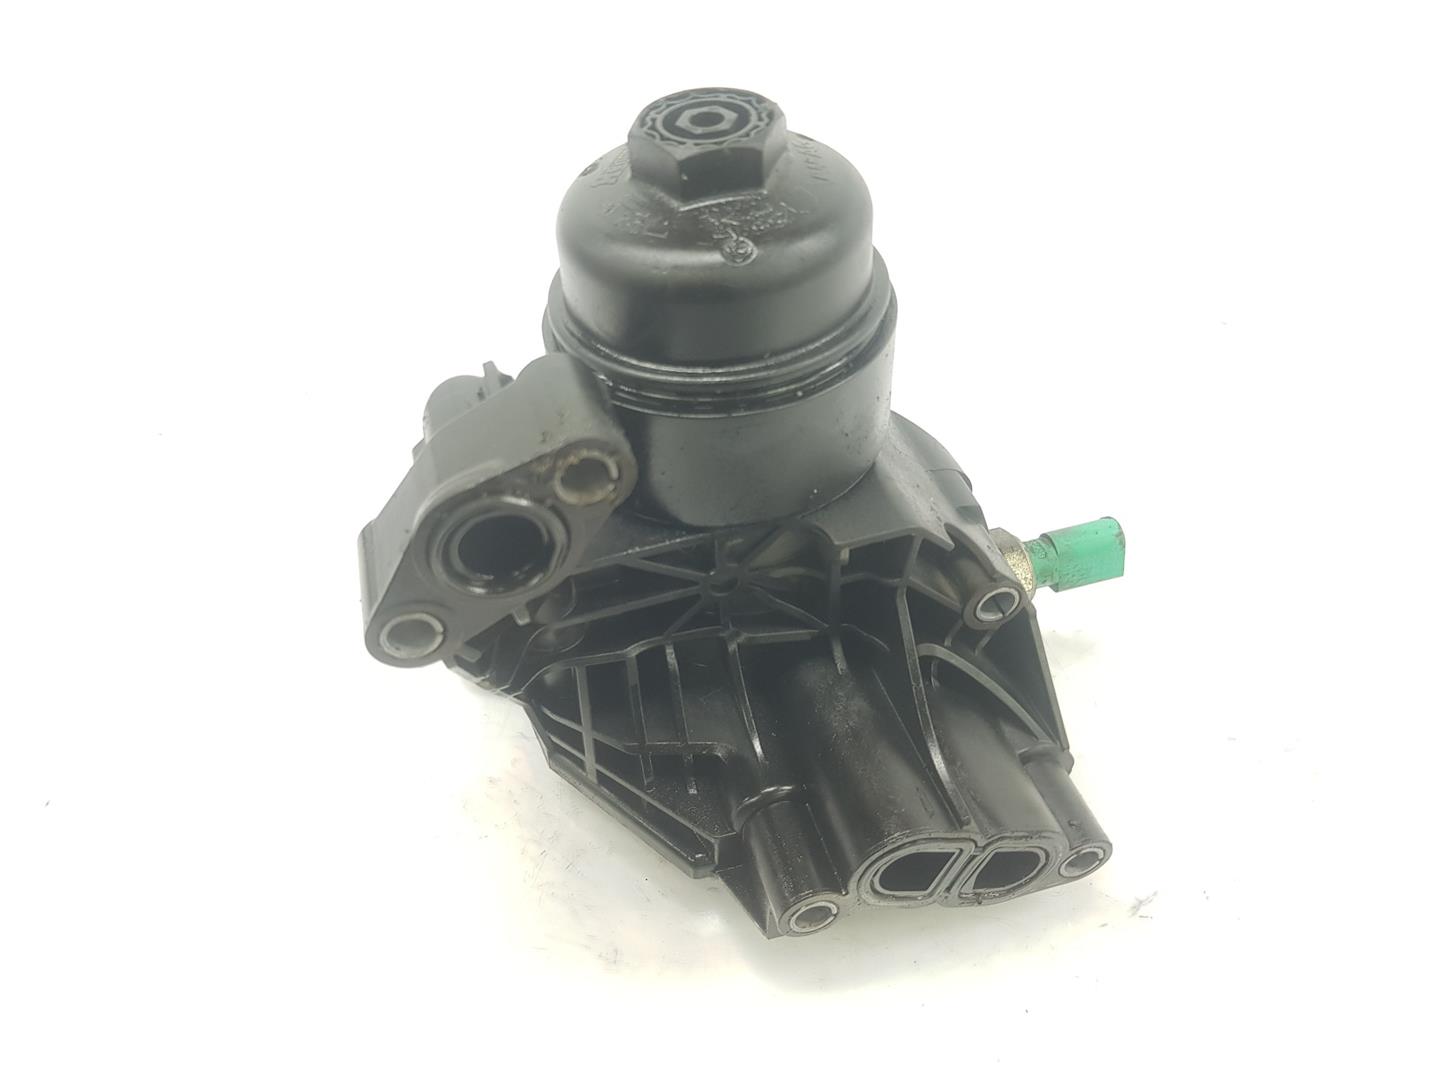 AUDI A3 8V (2012-2020) Other Engine Compartment Parts 03N115389A, 03N115389A, 1151CB2222DL 19937080